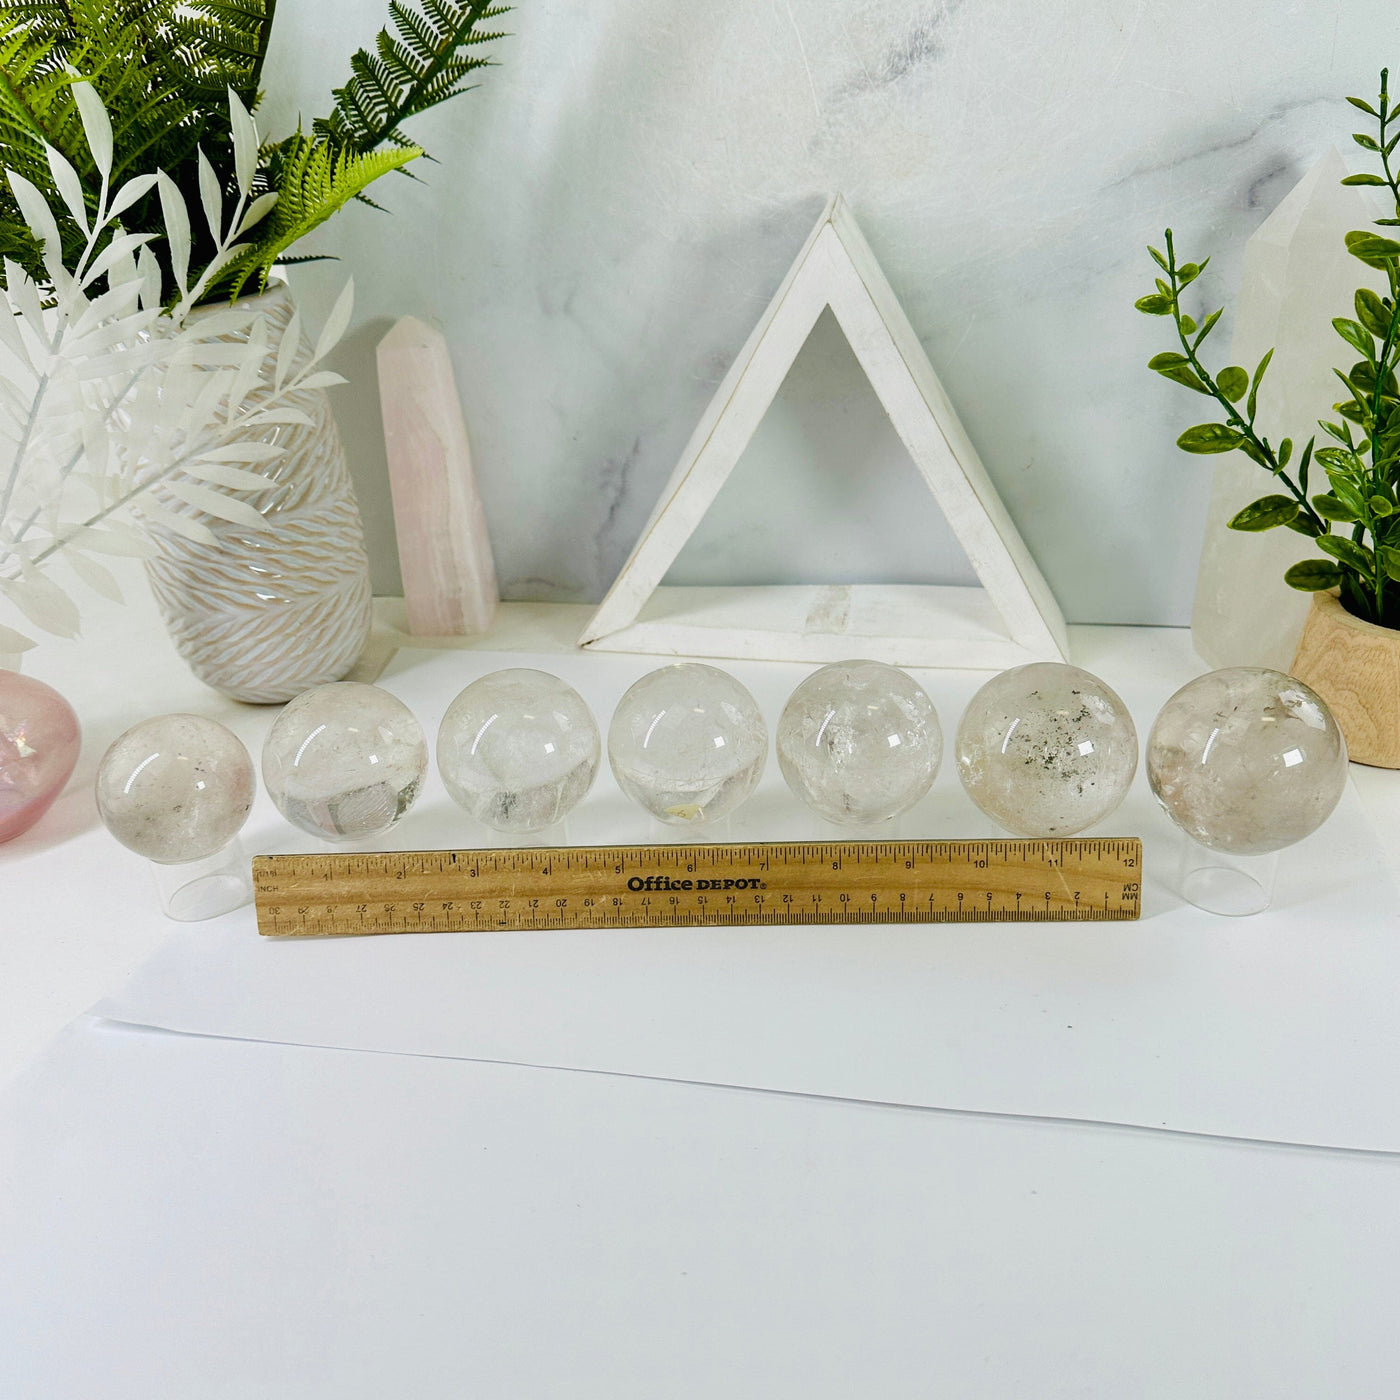 Crystal Quartz Sphere - Crystal Ball - You Choose all variants with ruler for size reference